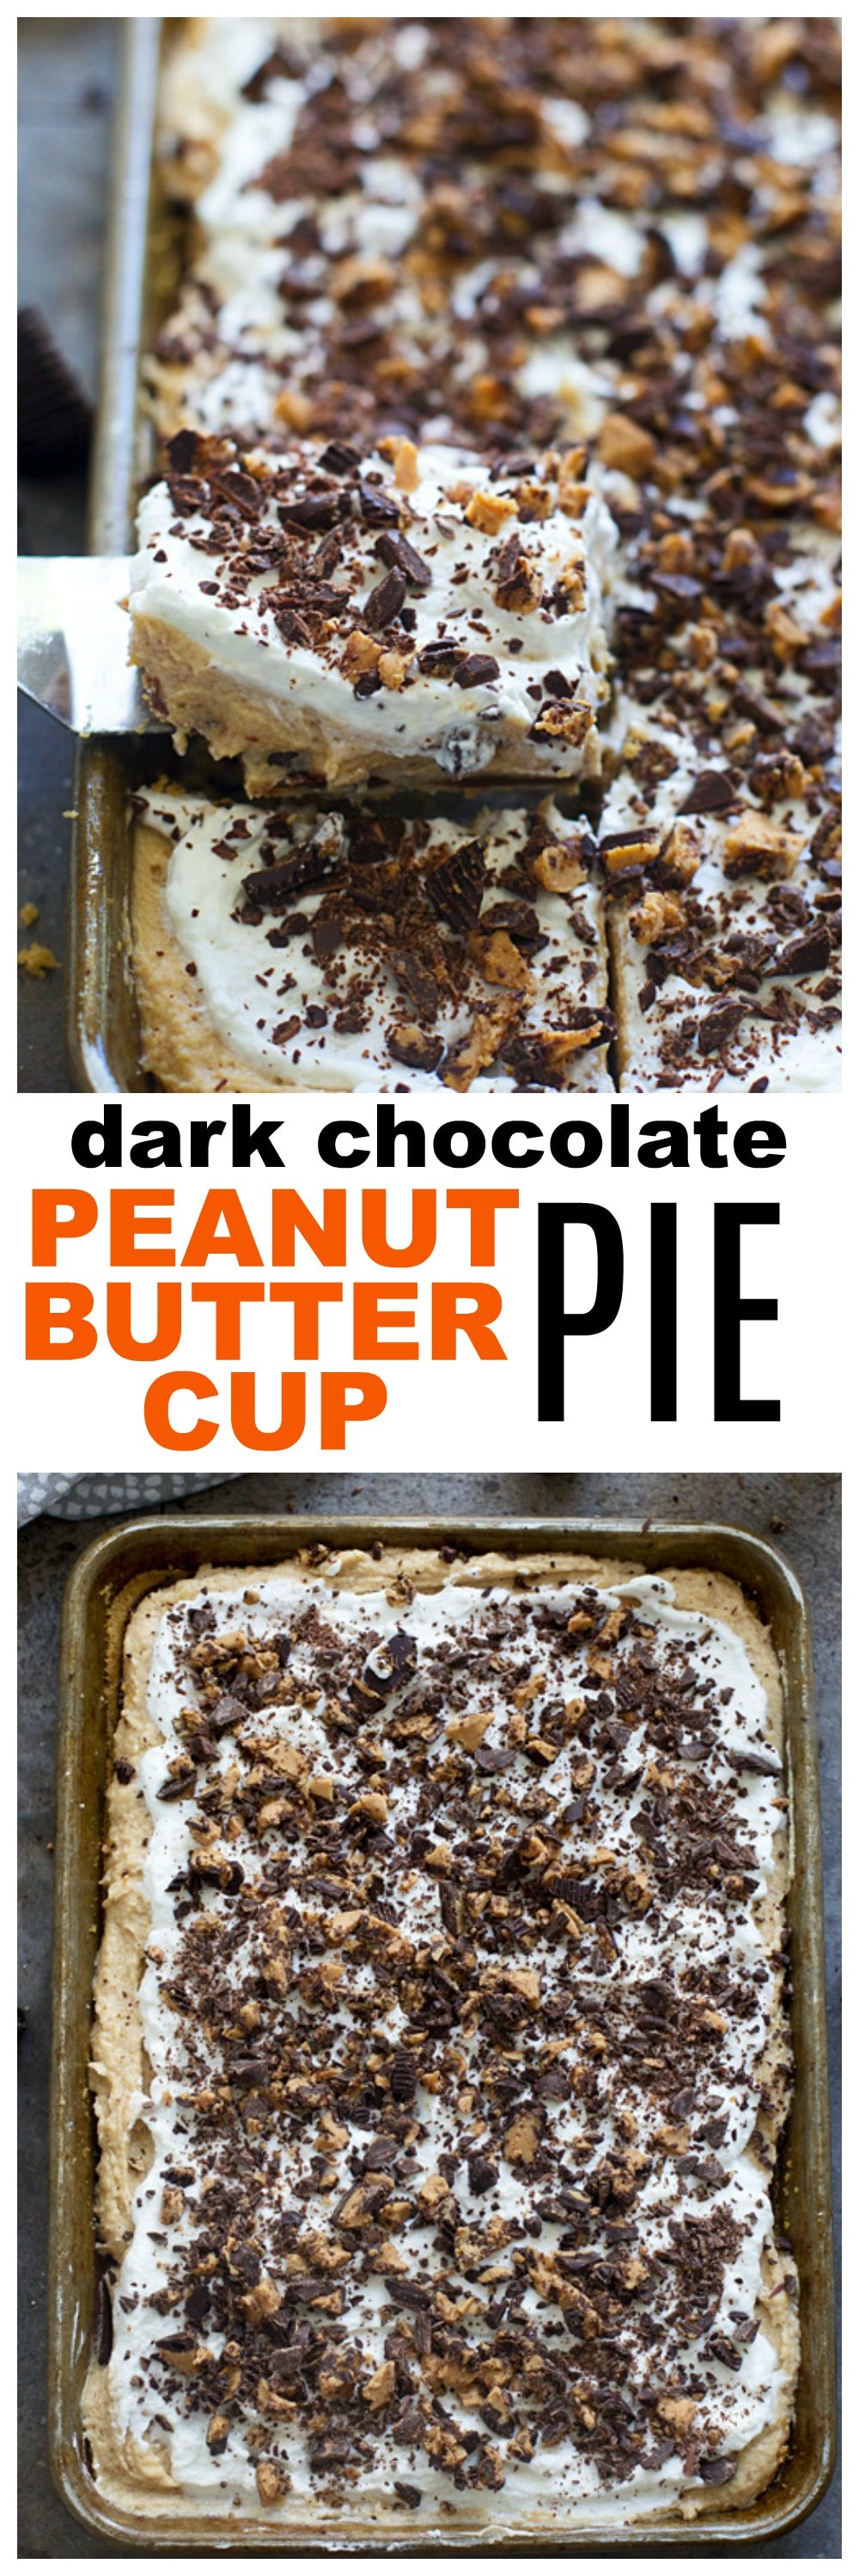 Dark Chocolate Peanut Butter Cup Slab Pie - From scratch! No frozen topping or store-bought crusts here! 